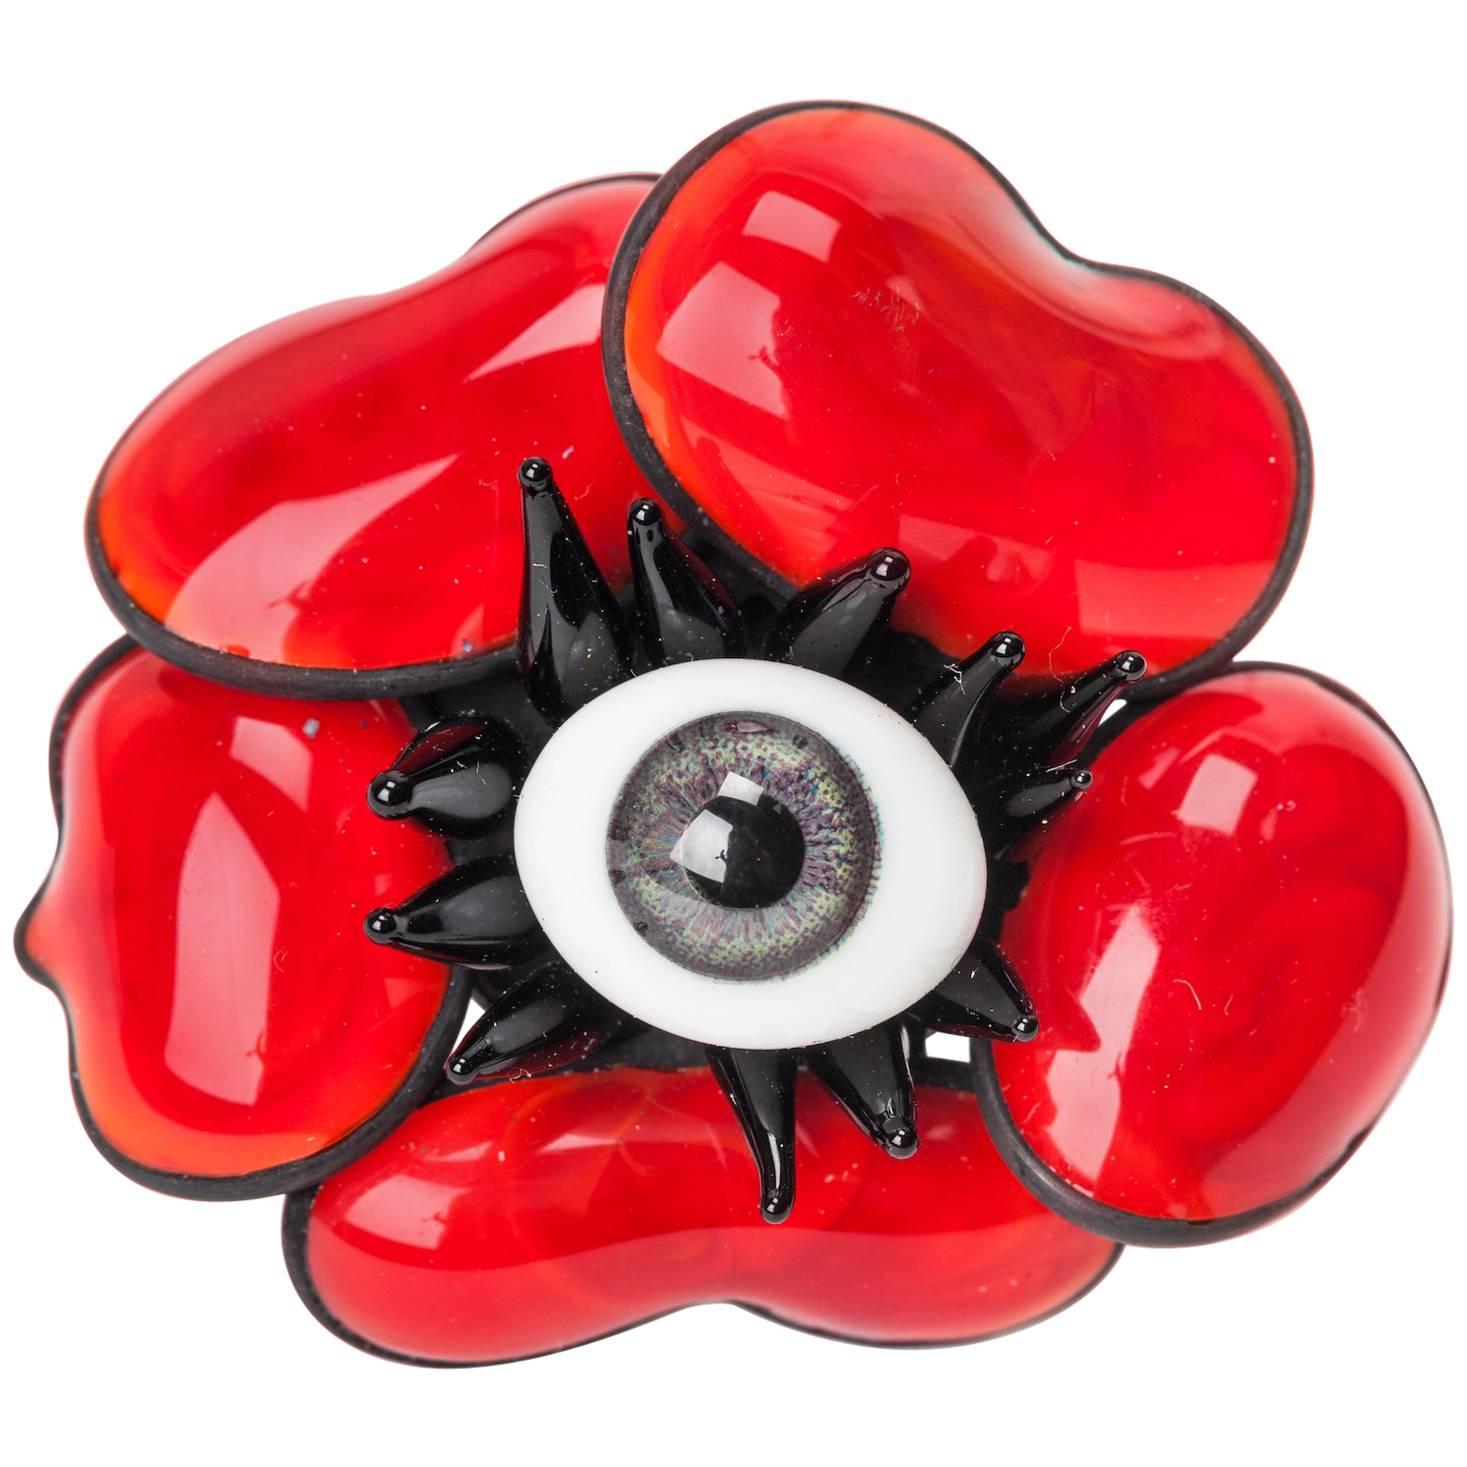 MWLC Surrealist Amythest Poppy Ring For Sale